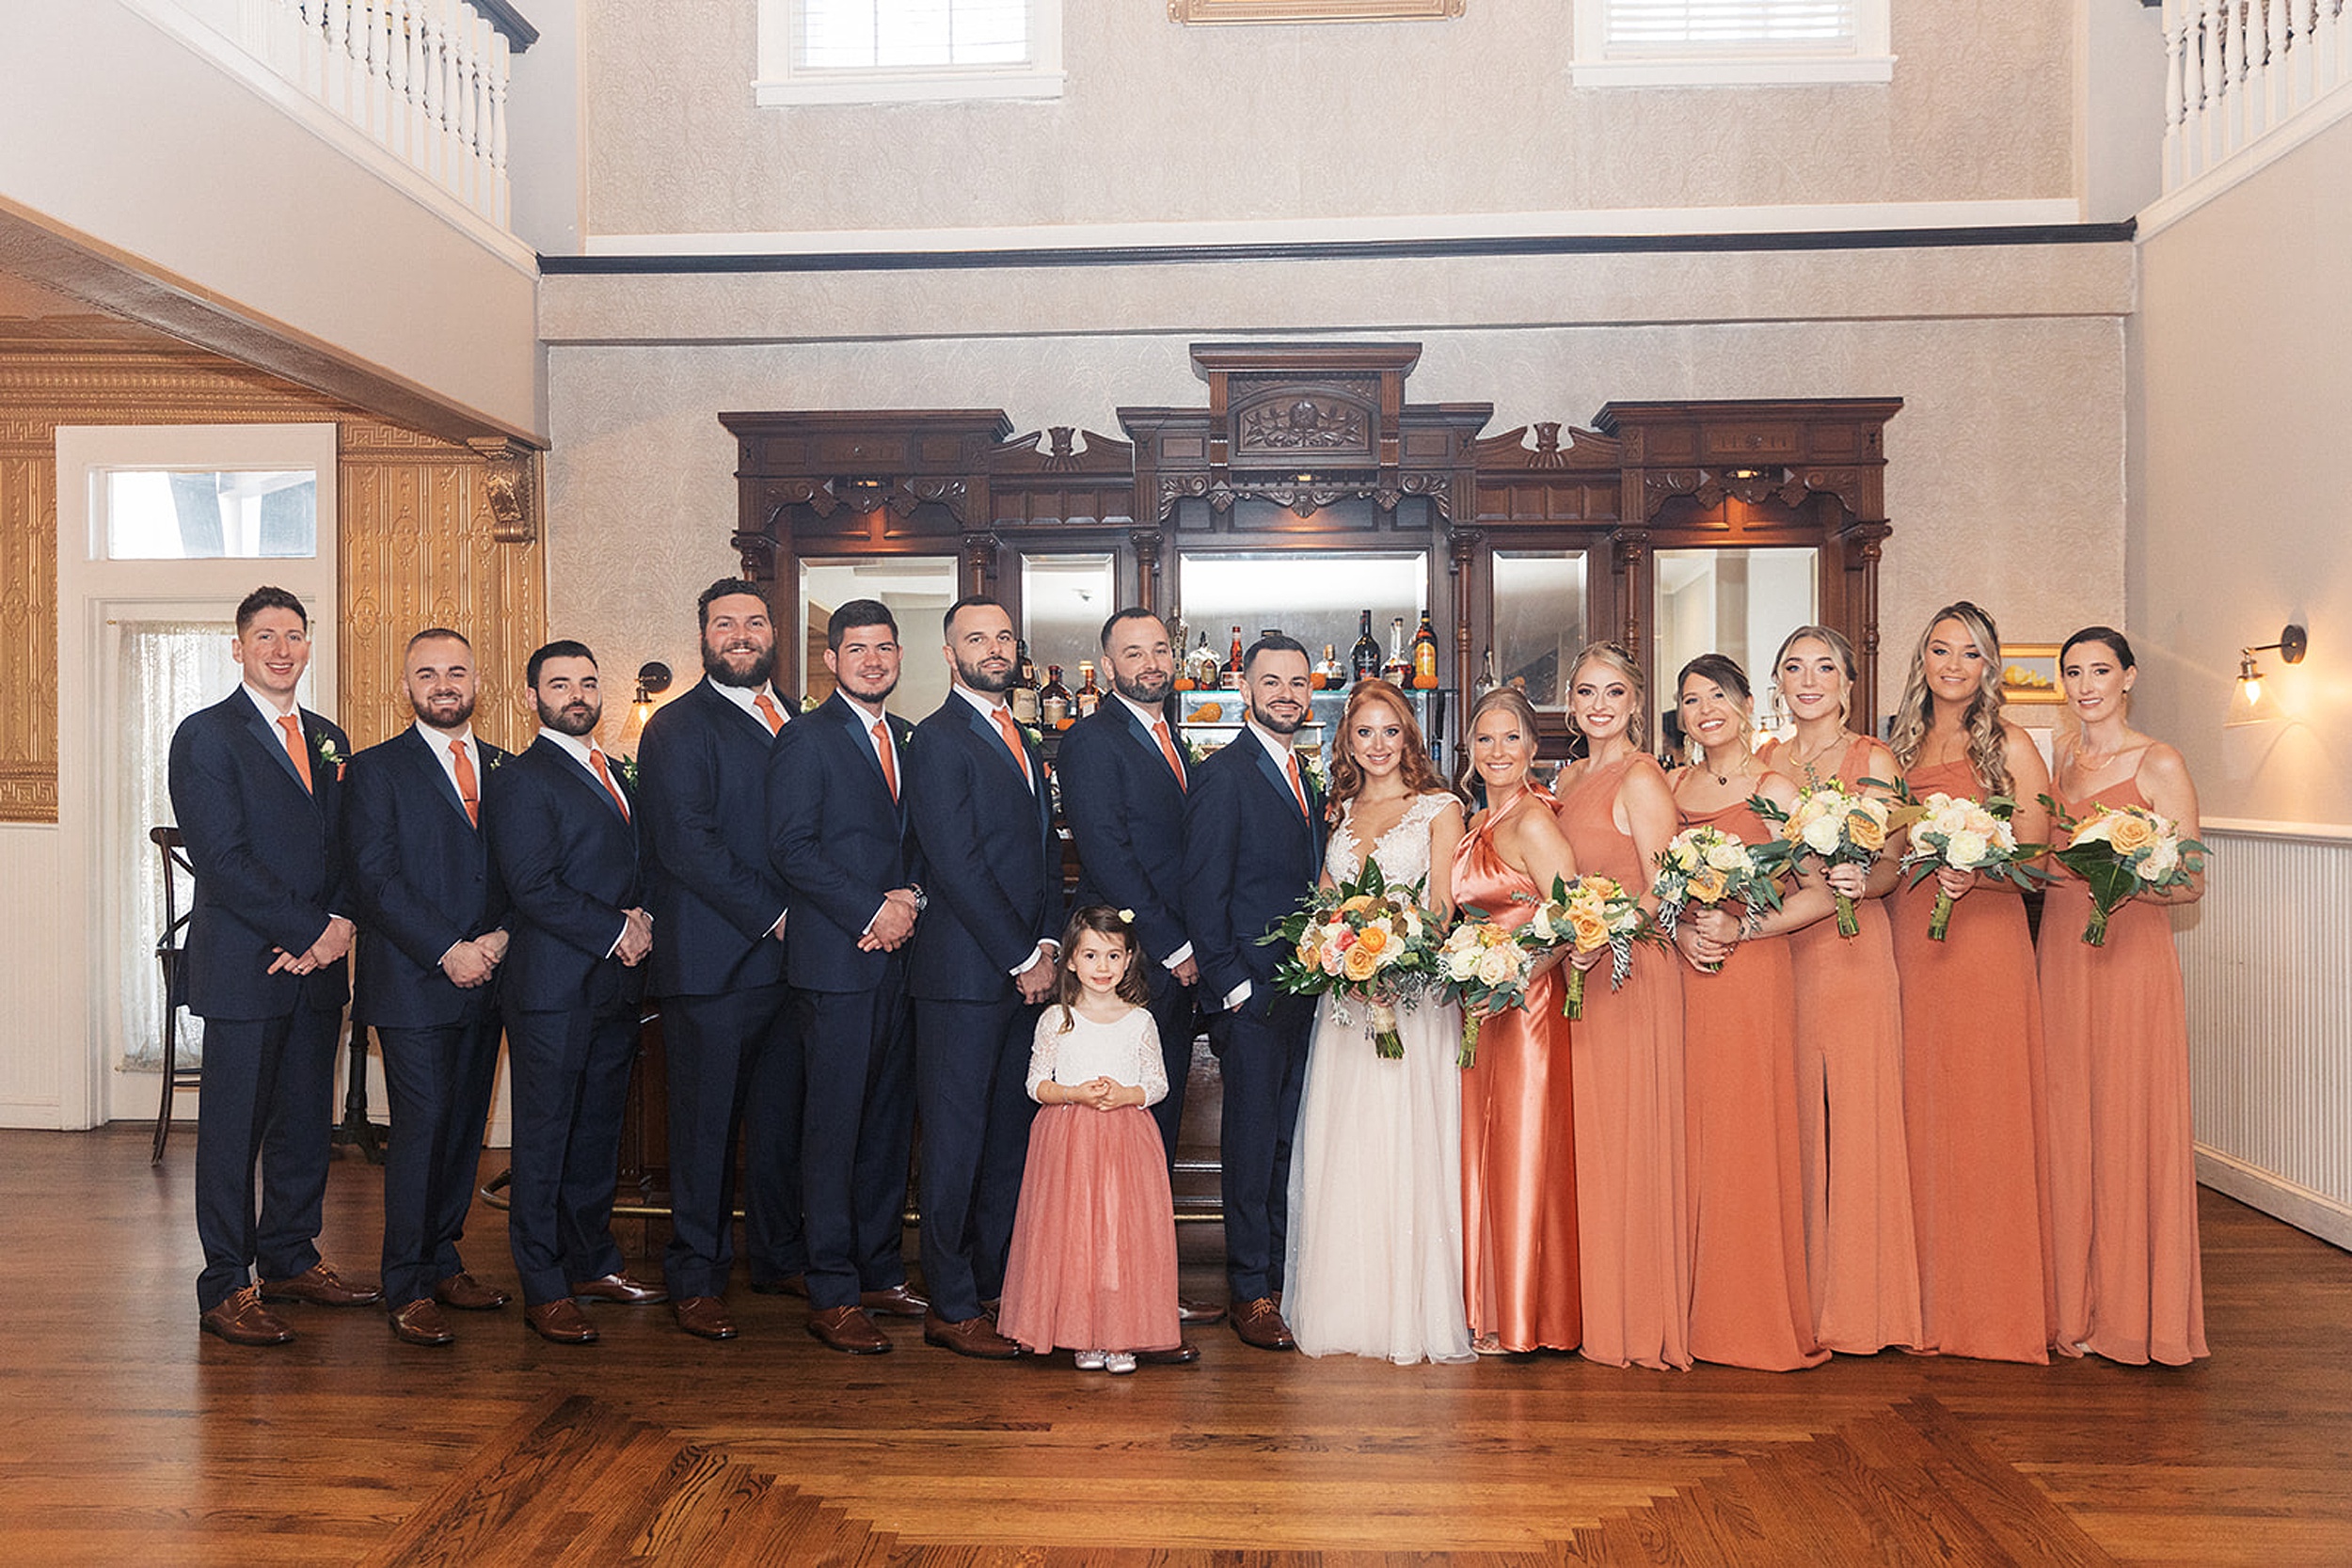 Newlyweds stand with their wedding parties in front of an antique bar